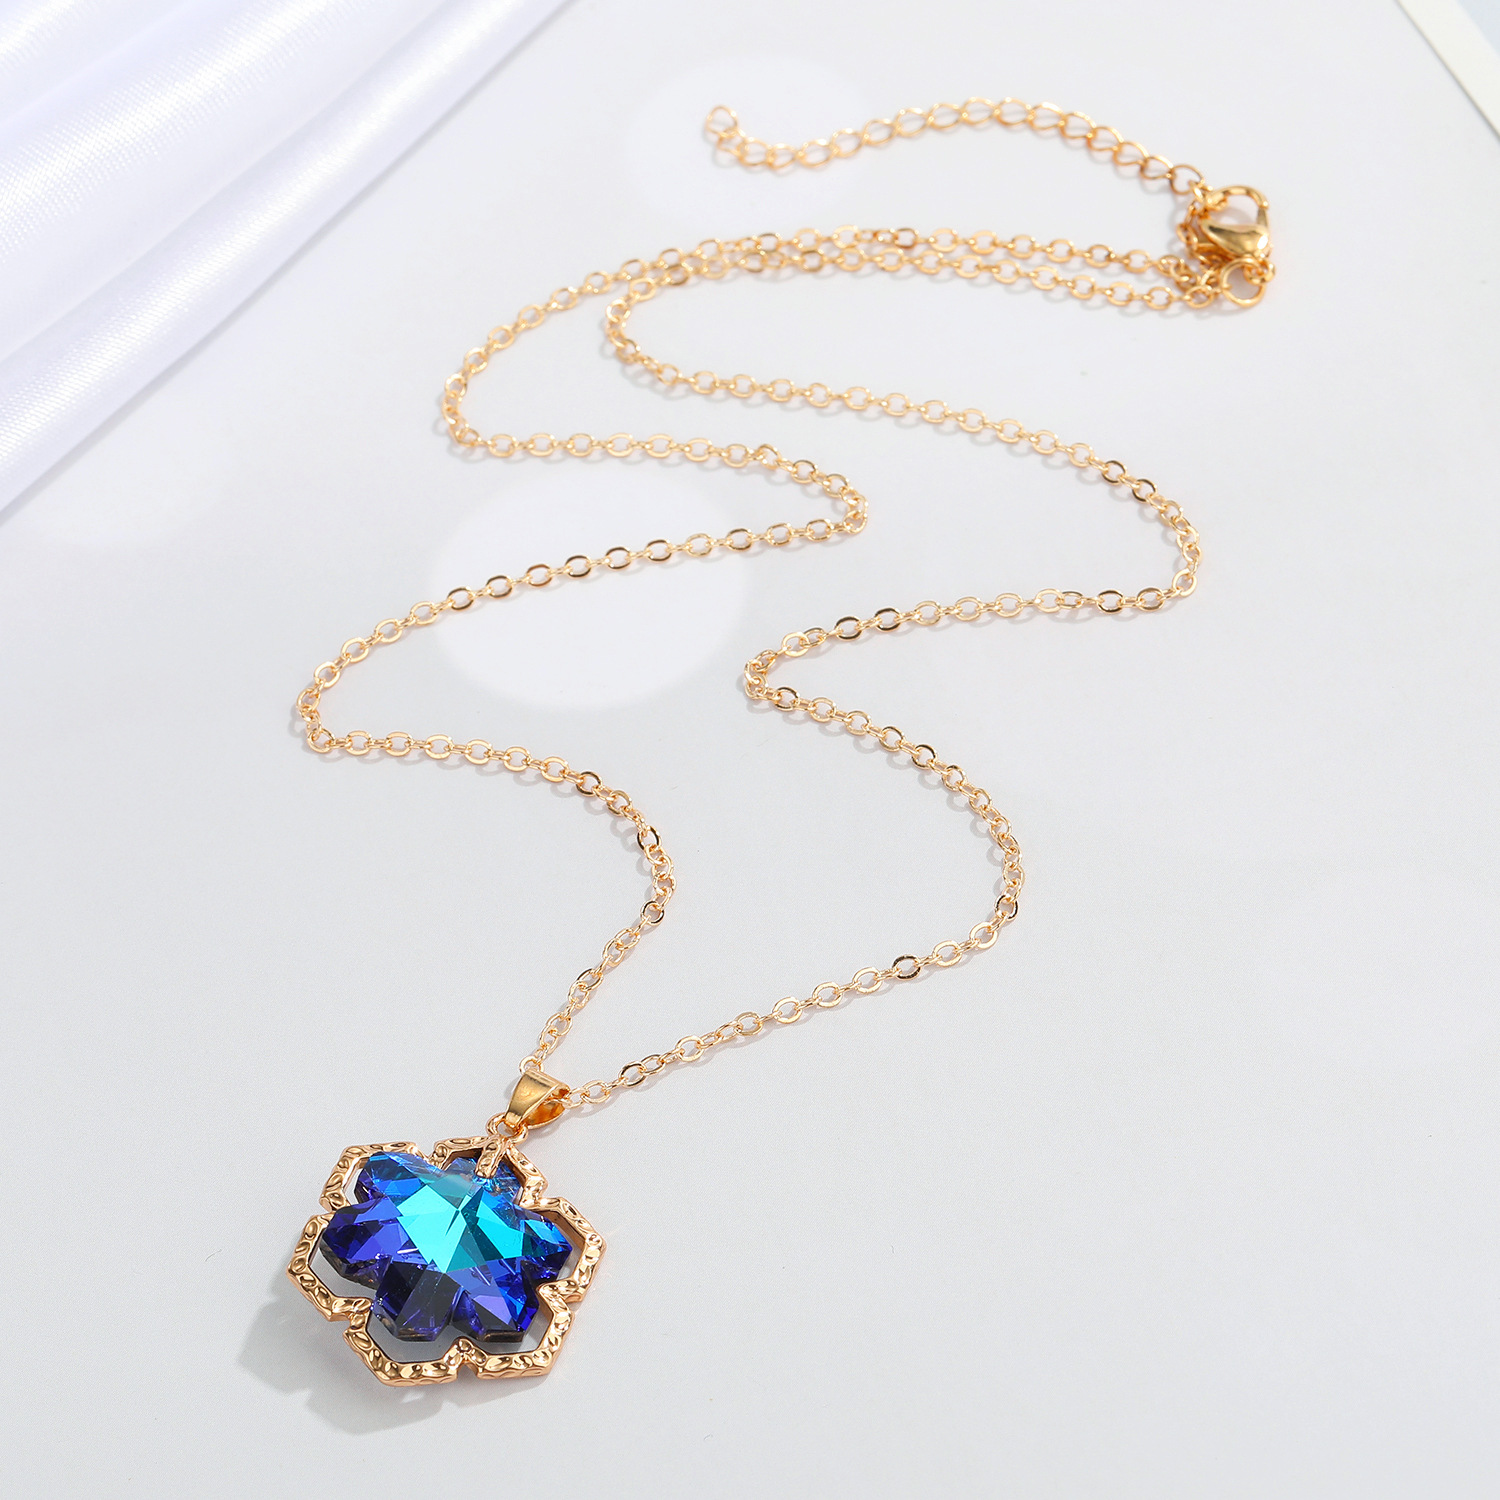 European CrossBorder Sold Jewelry Blue Crystal Glass Necklace Simple Star and Moon Pendant Clavicle Chain Female Necklacepicture6